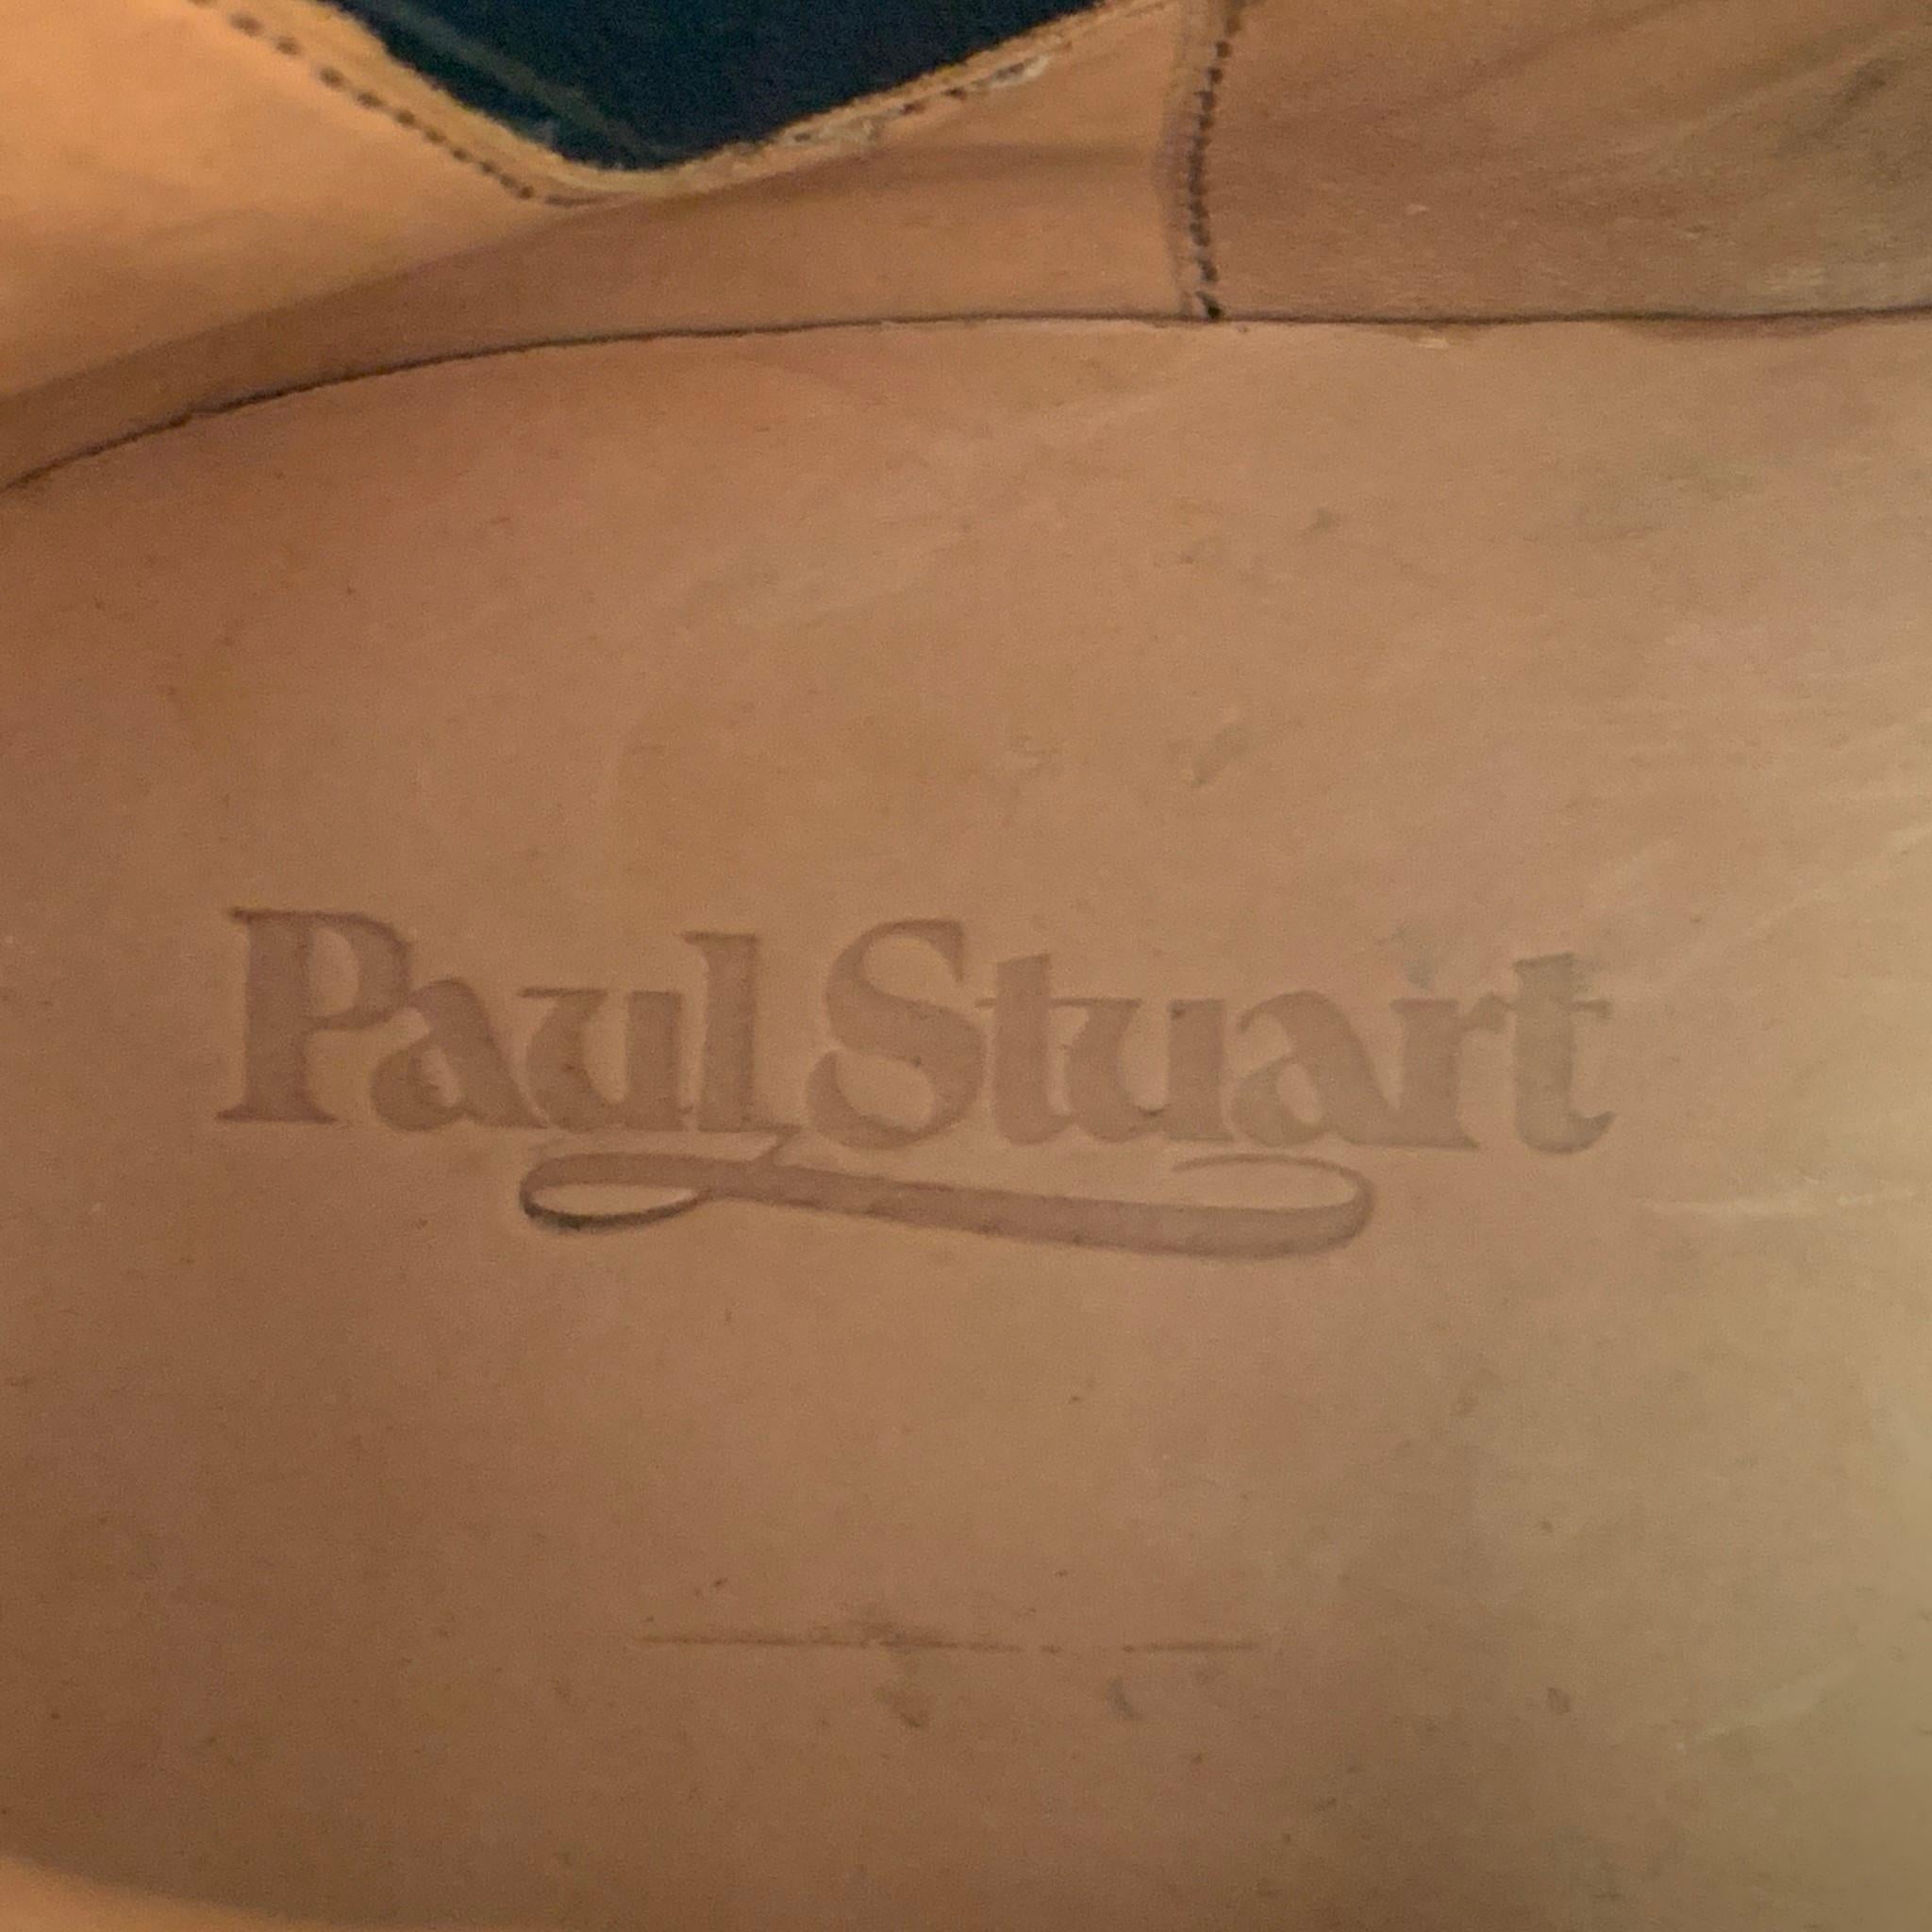 PAUL STUART Size 11 Tan Antique Leather Pull On Boots 3